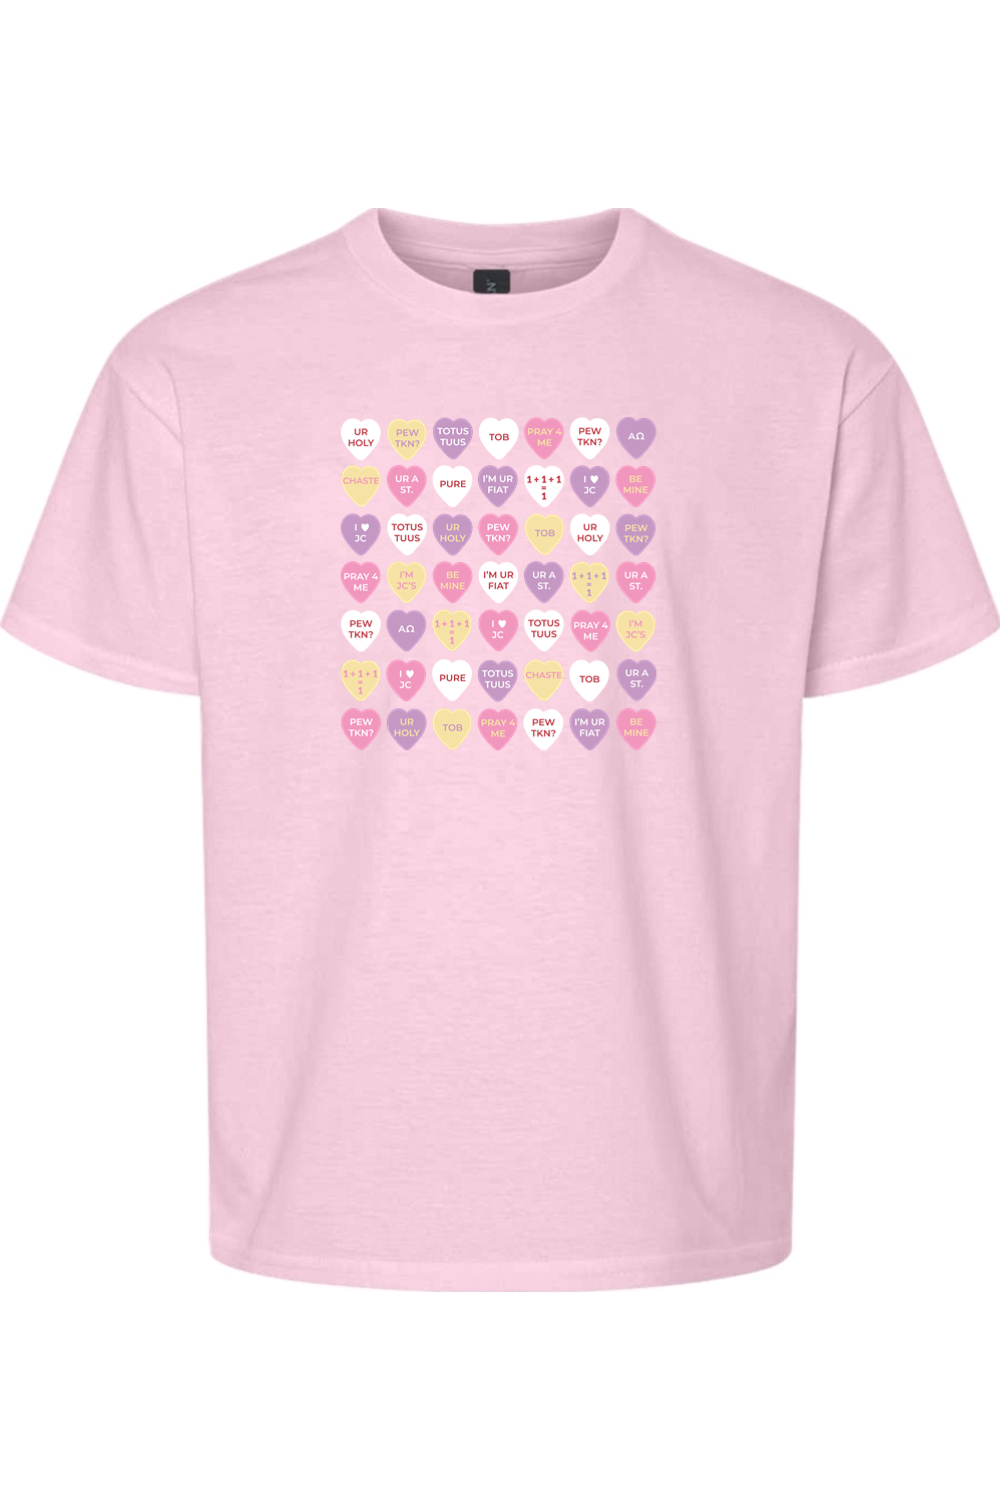 Candy Hearts T-Shirt - youth